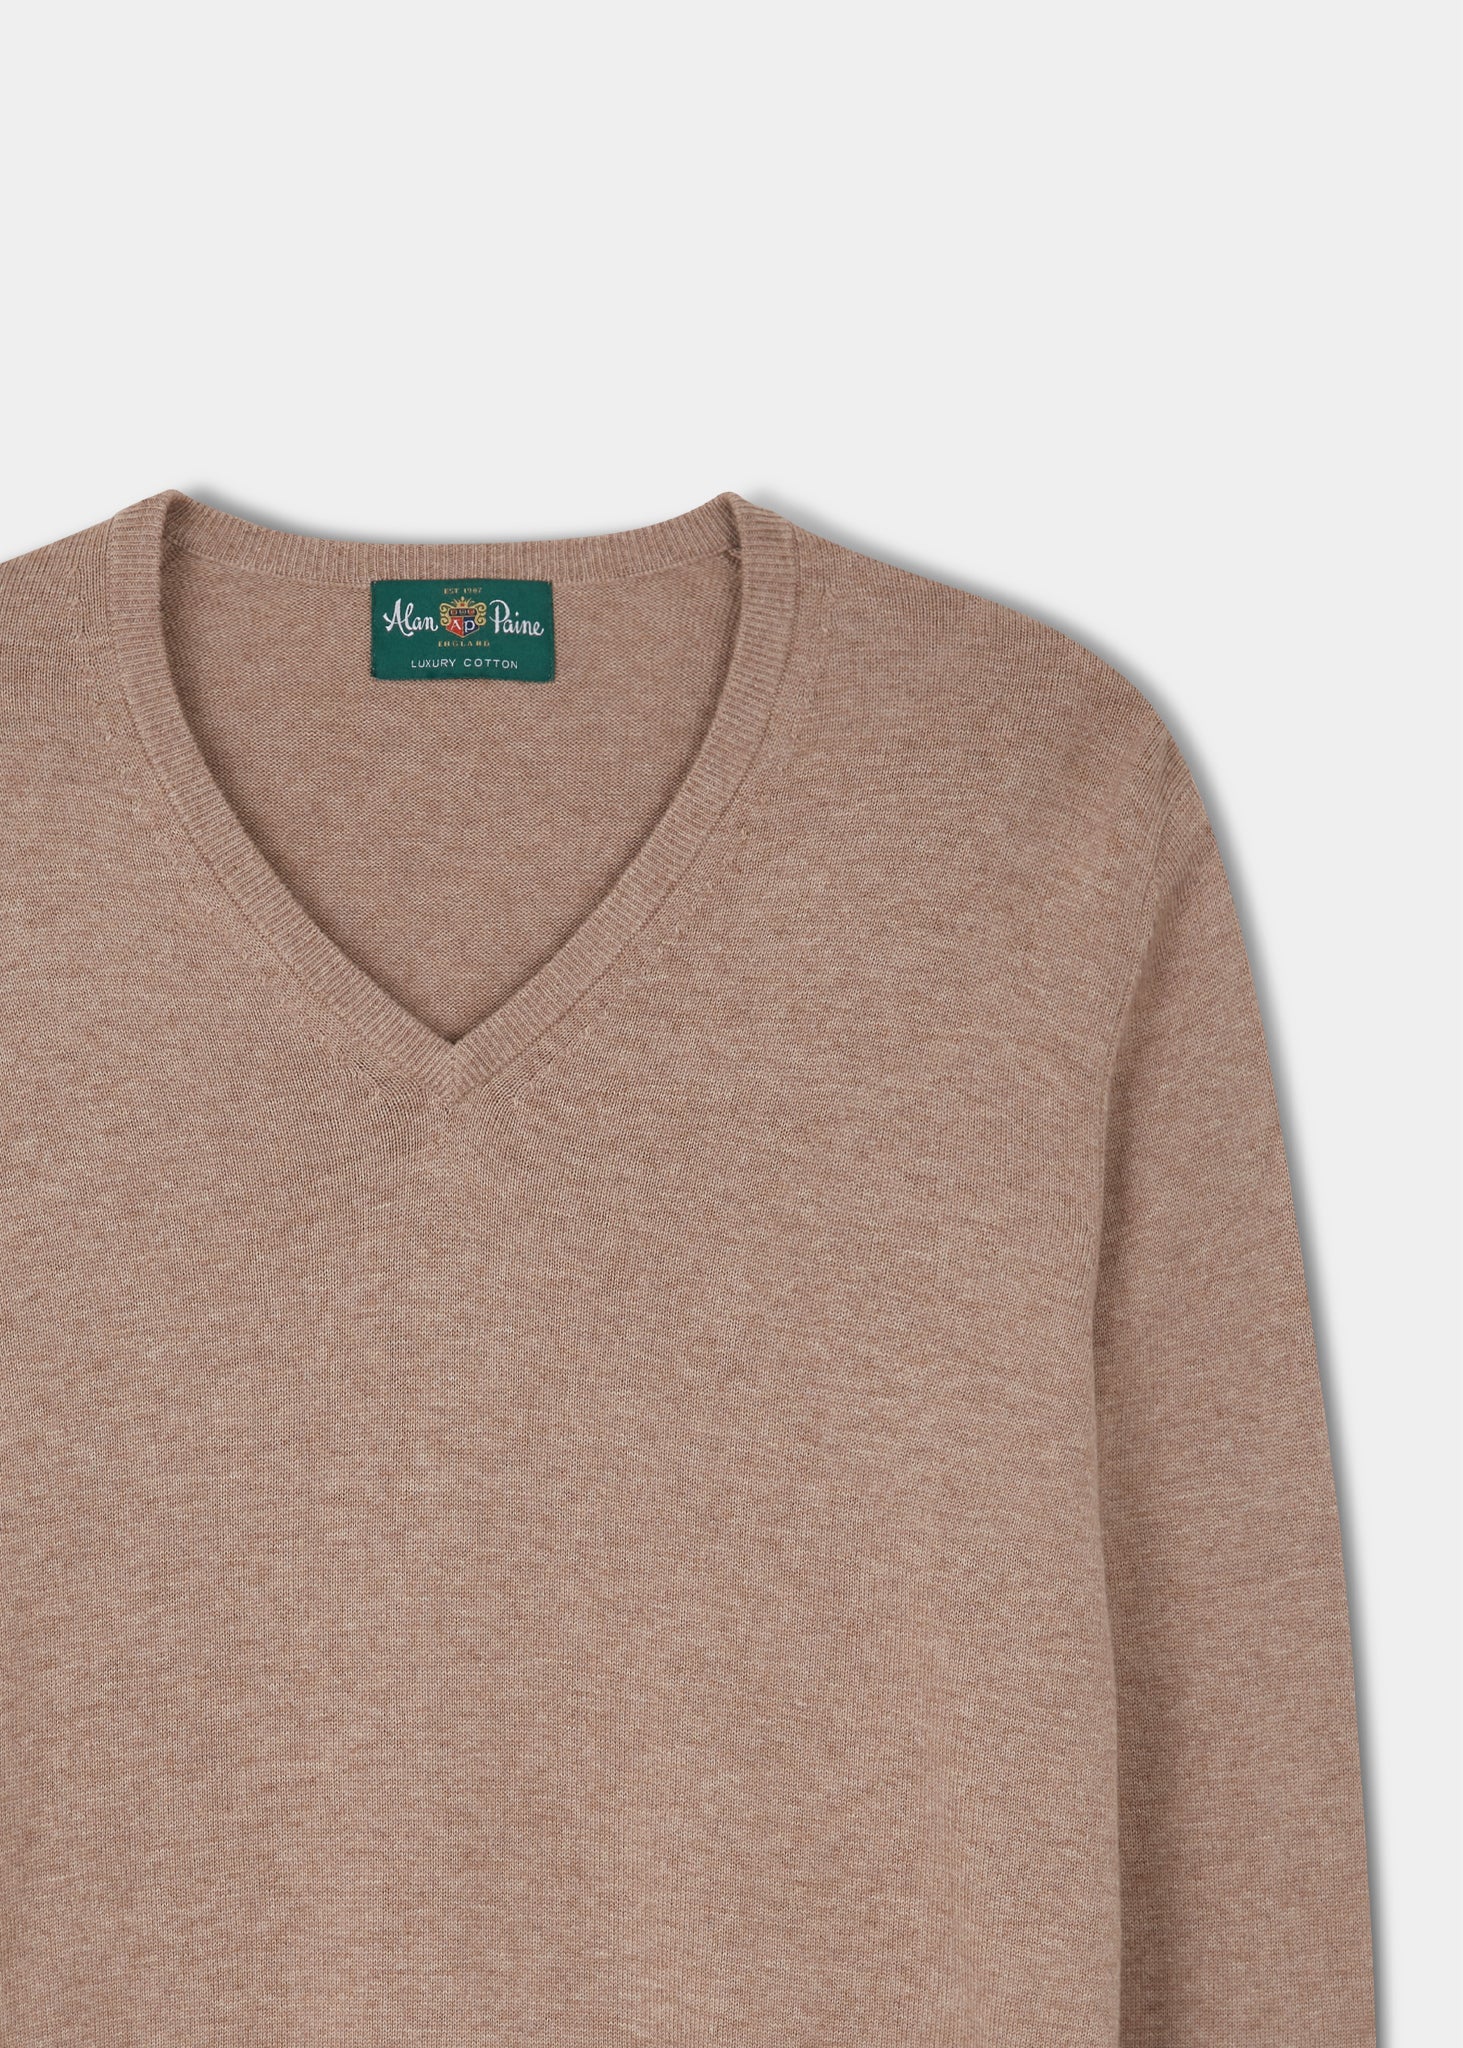 Alan Paine cotton cashmere v-neck jumper in coffee